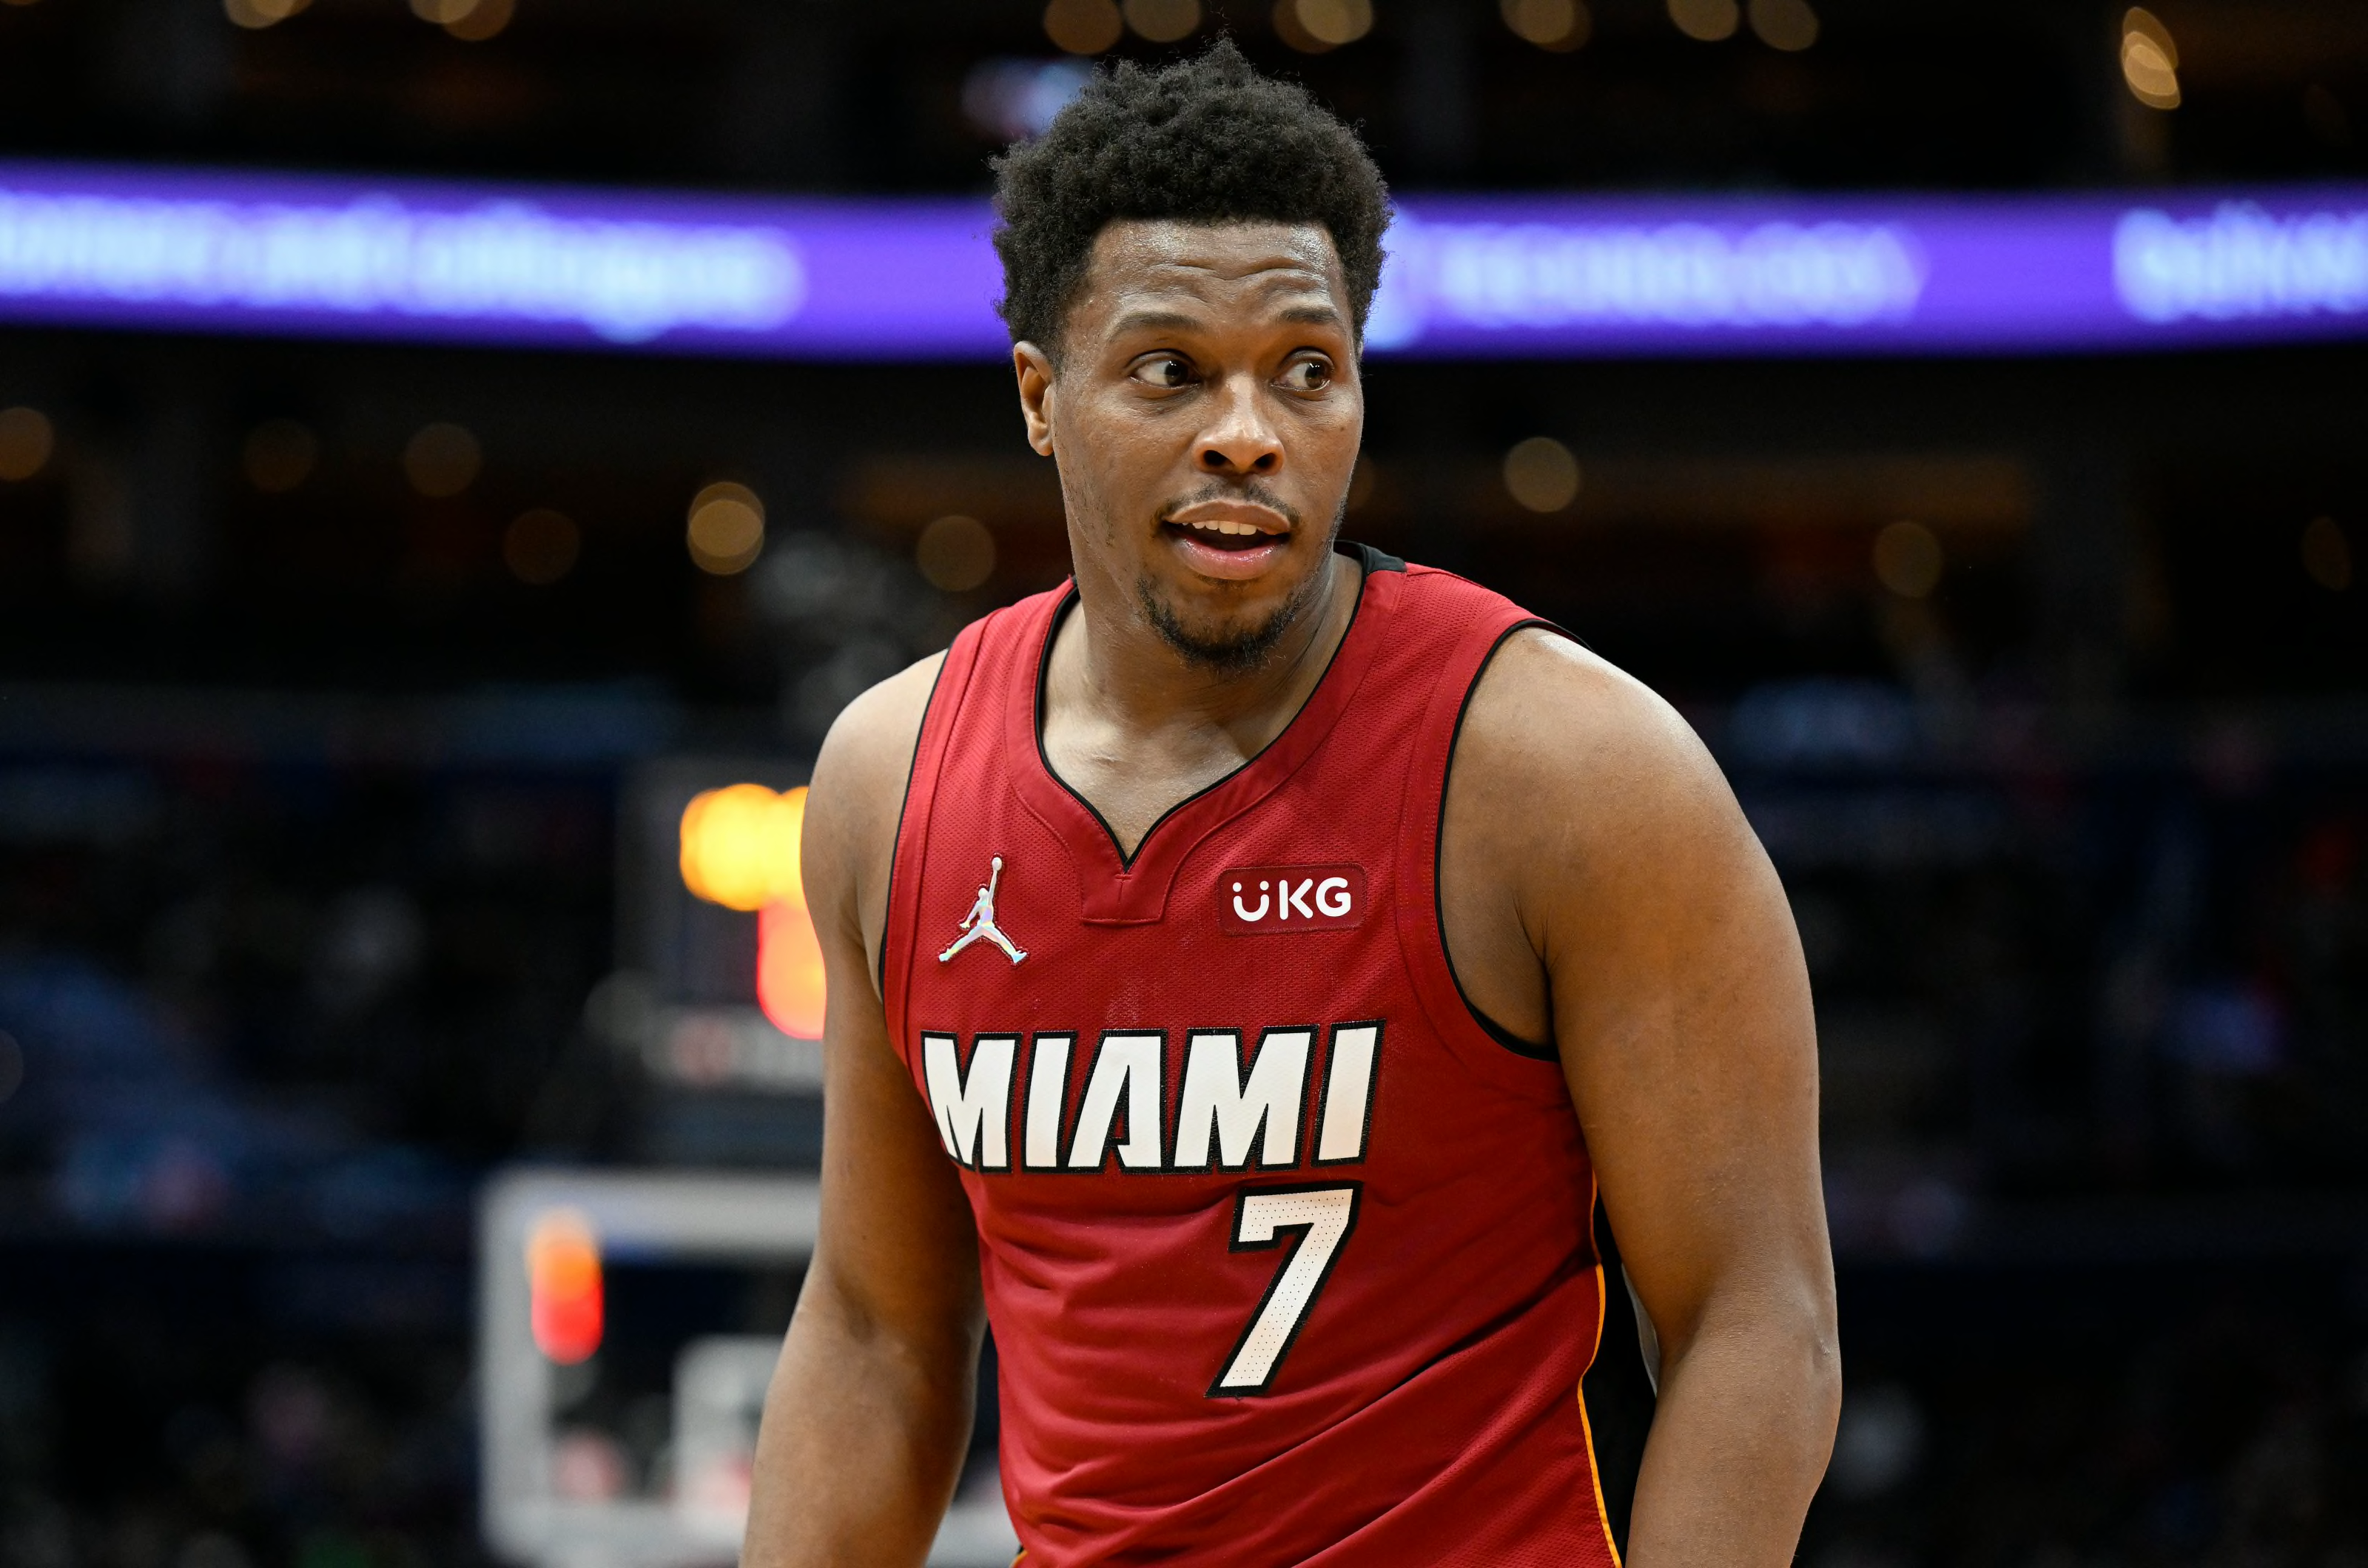 Kyle Lowry is the driving force the Heat need for playoff push